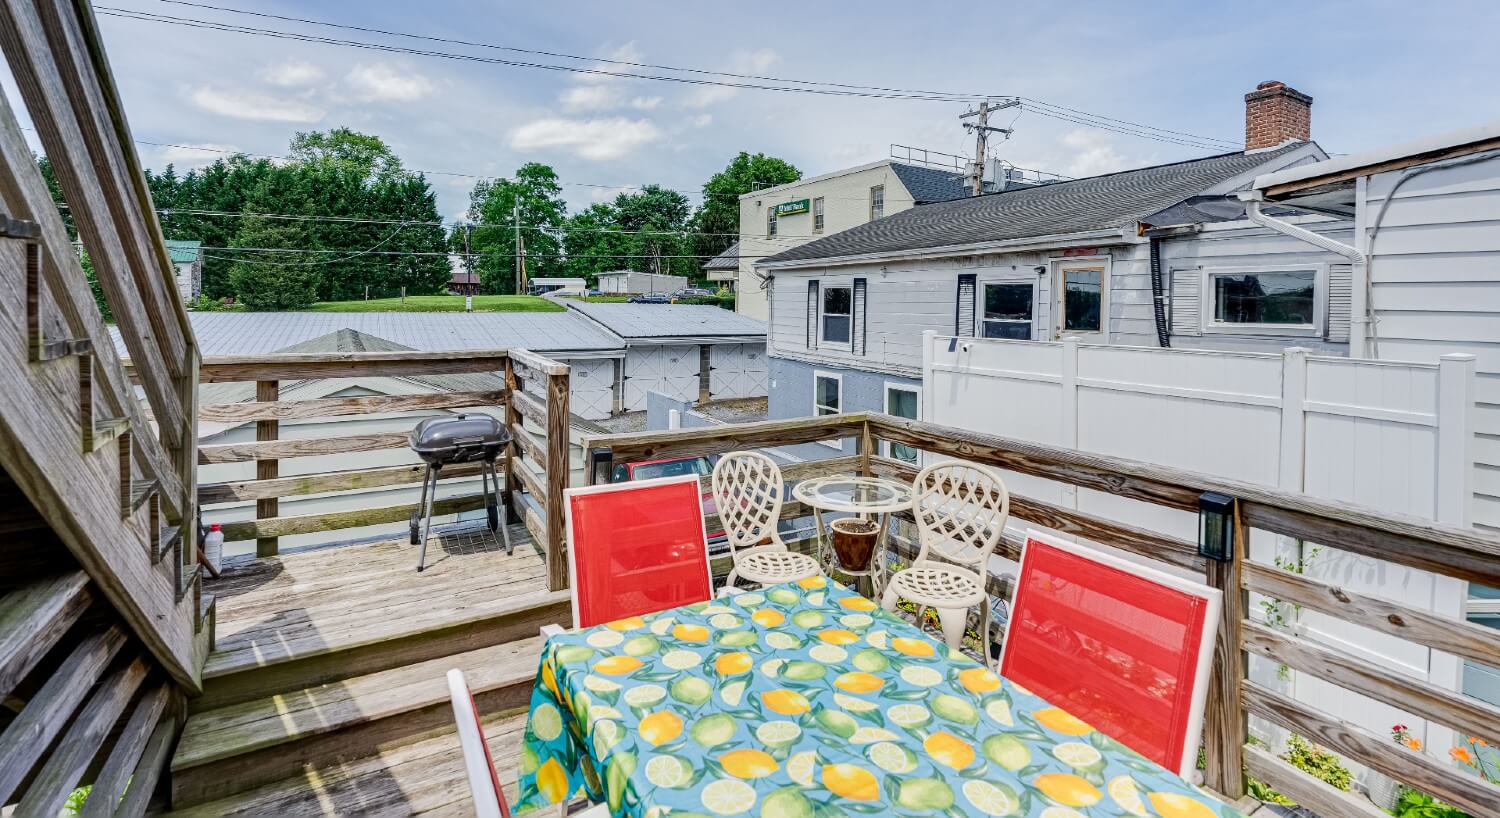 Outdoor deck patio with table and chairs and small BBQ grill